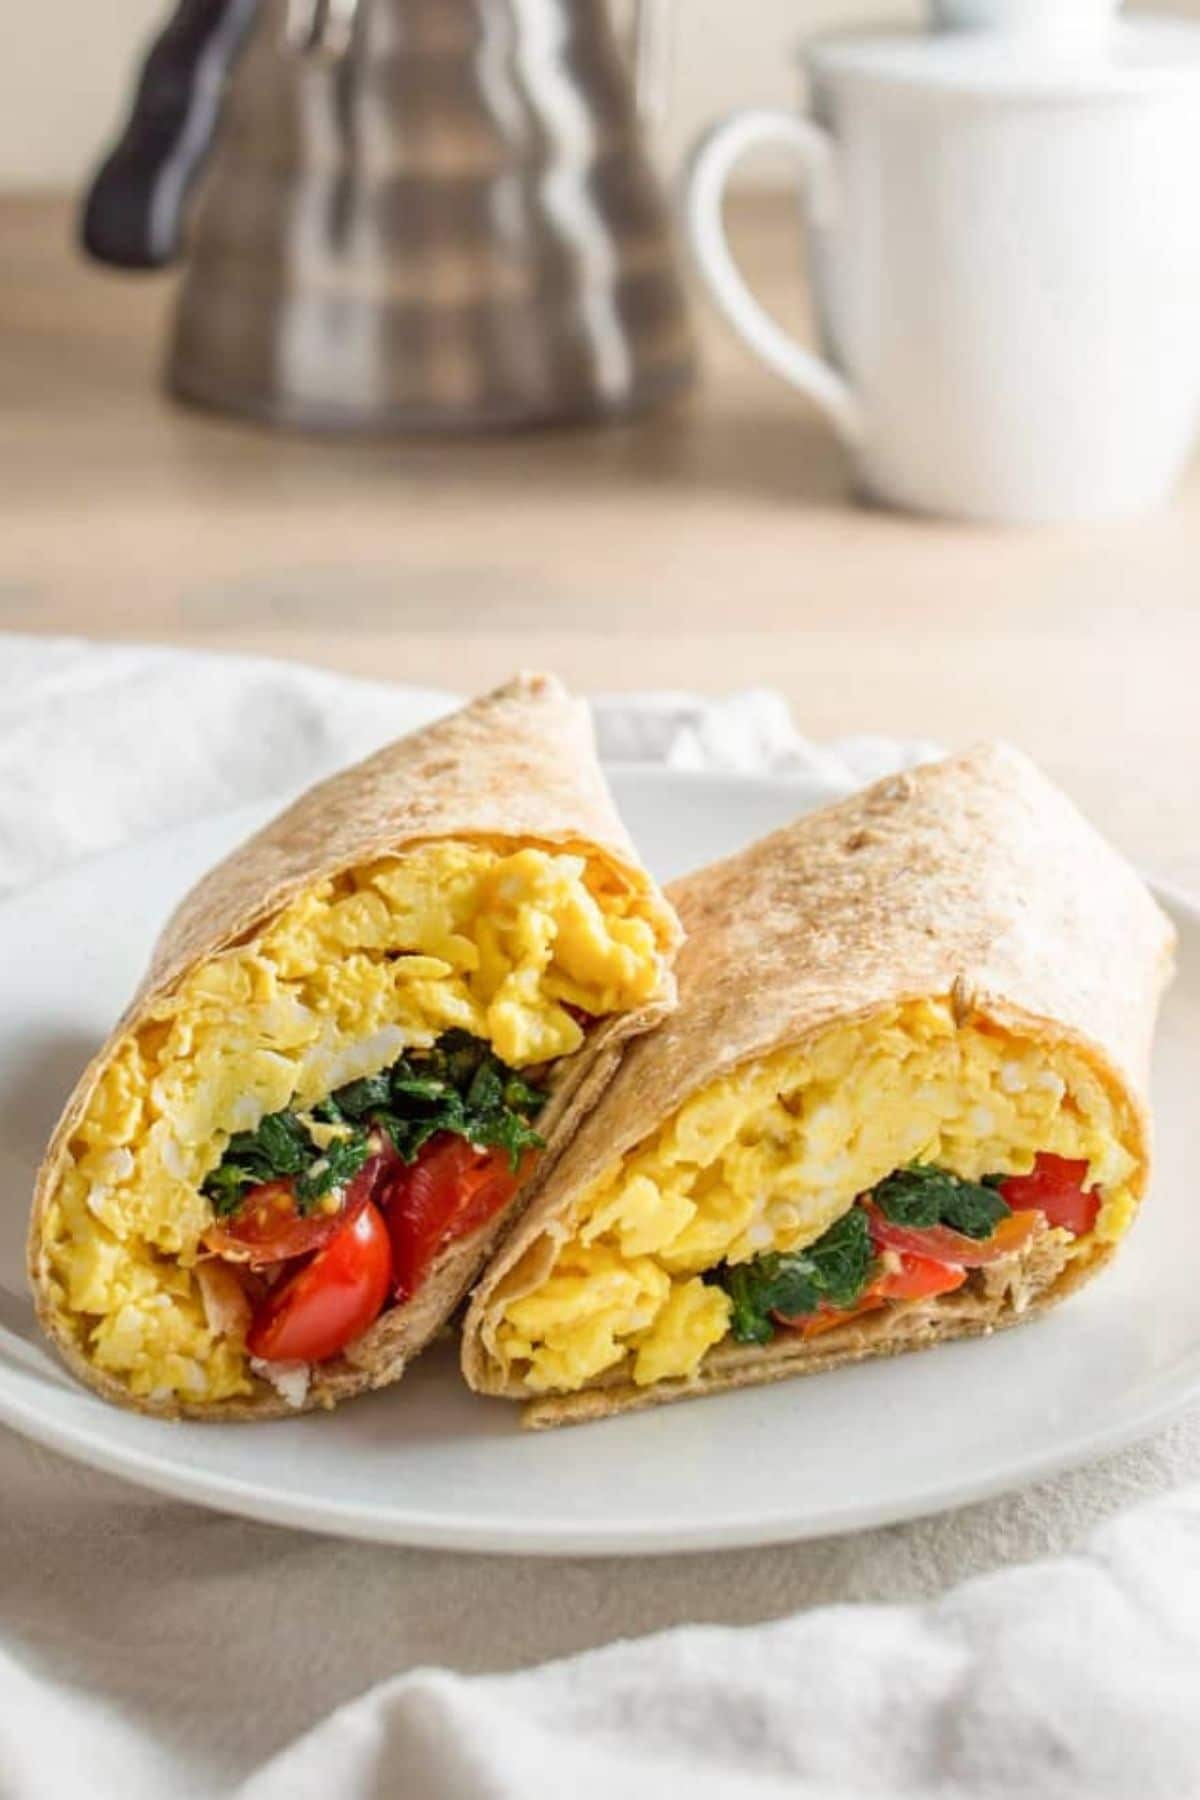 Egg and spinach inside tortilla on plate